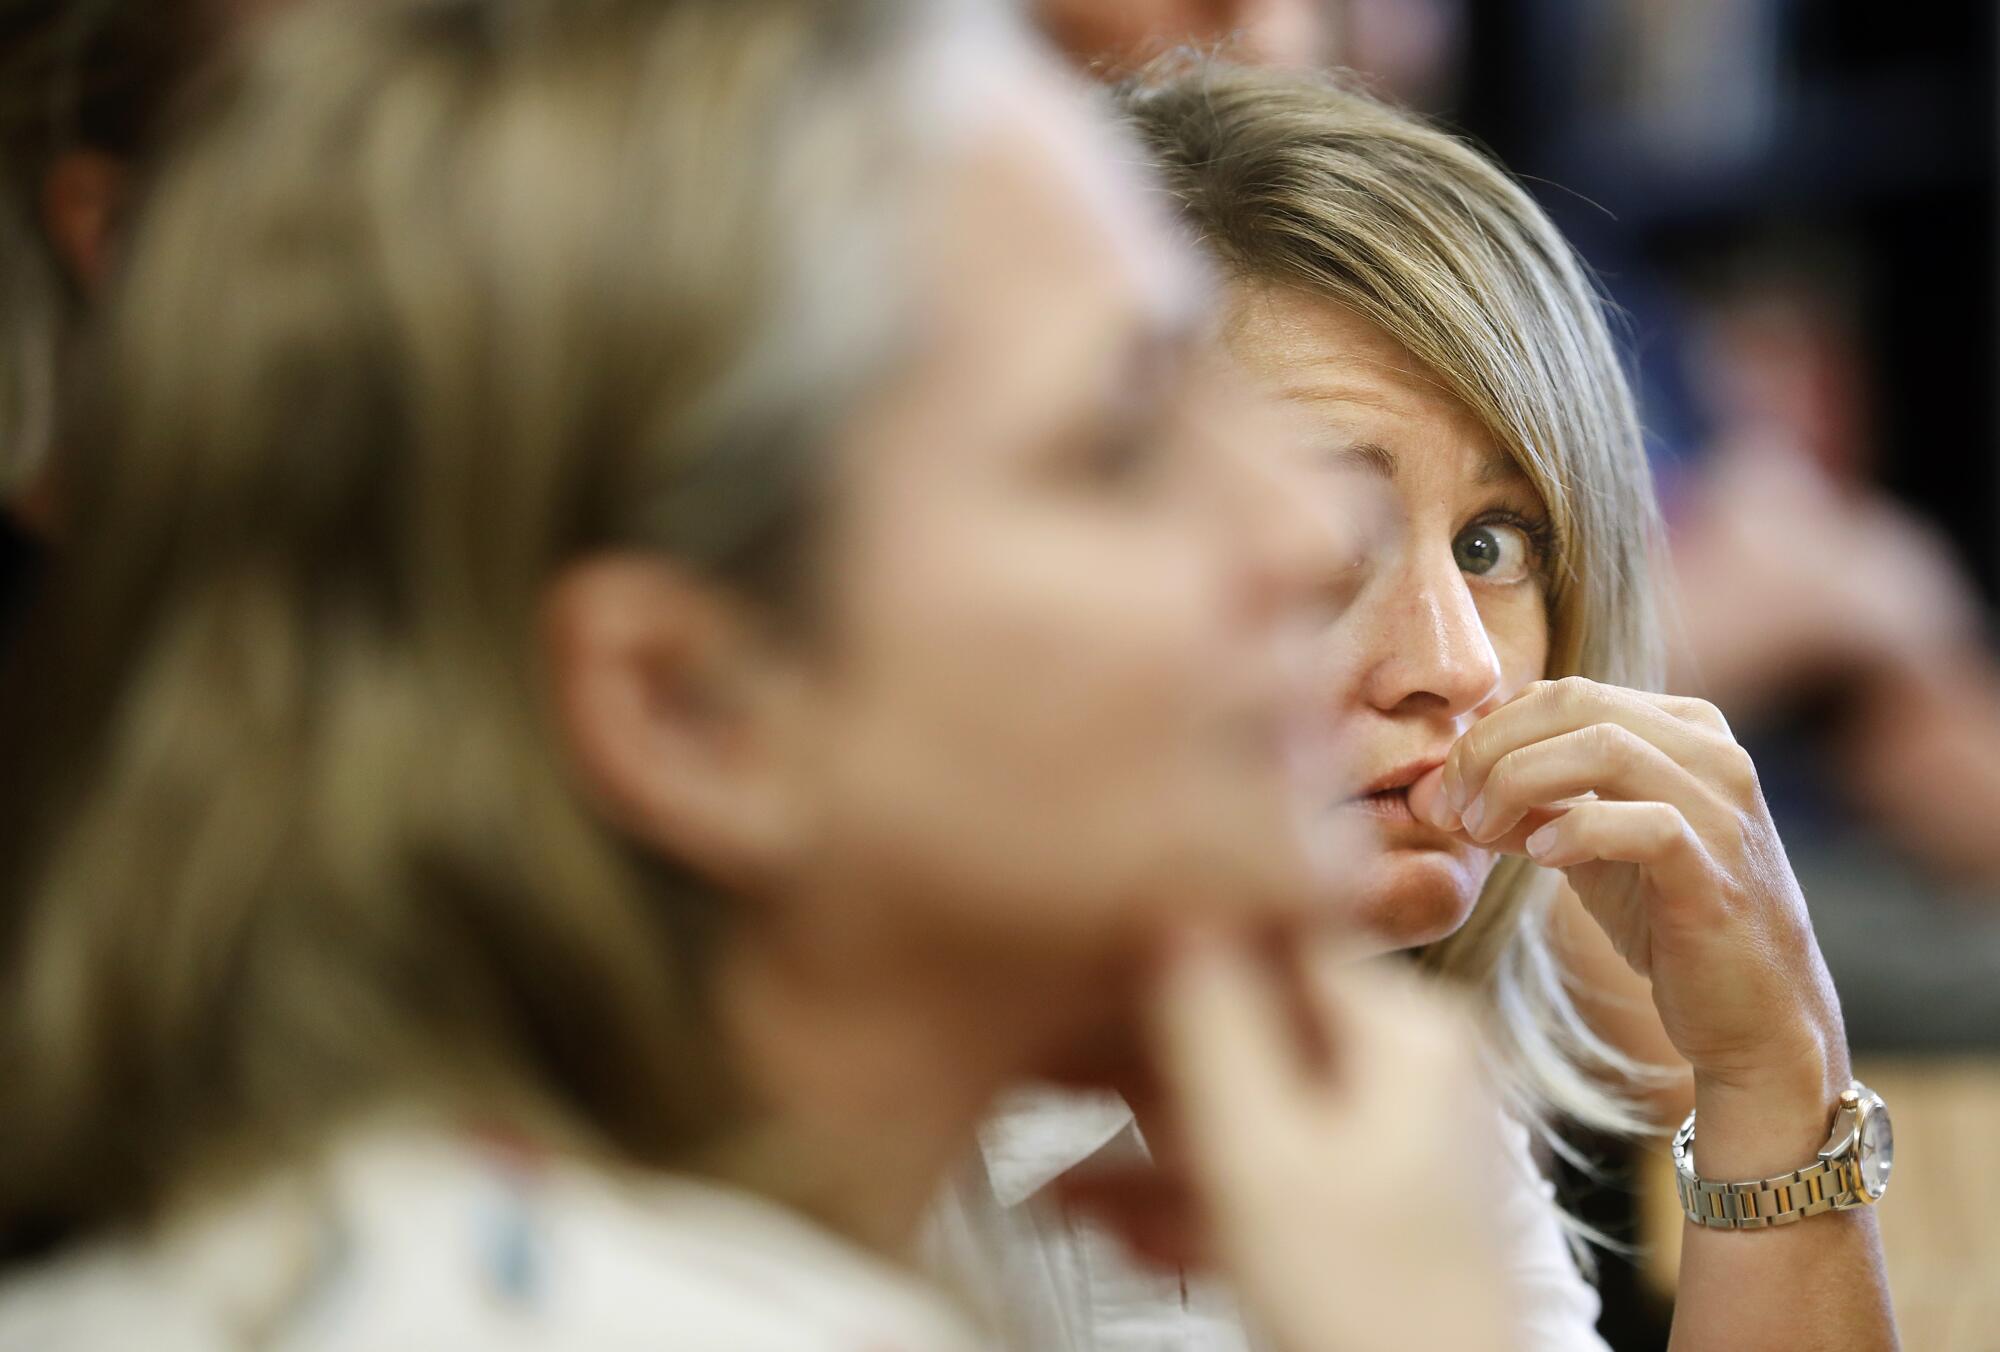 Miranda Domenico, right, listens closely during an active shooter training session held at Golden View Classical Academy, a charter school in Golden, Colo.